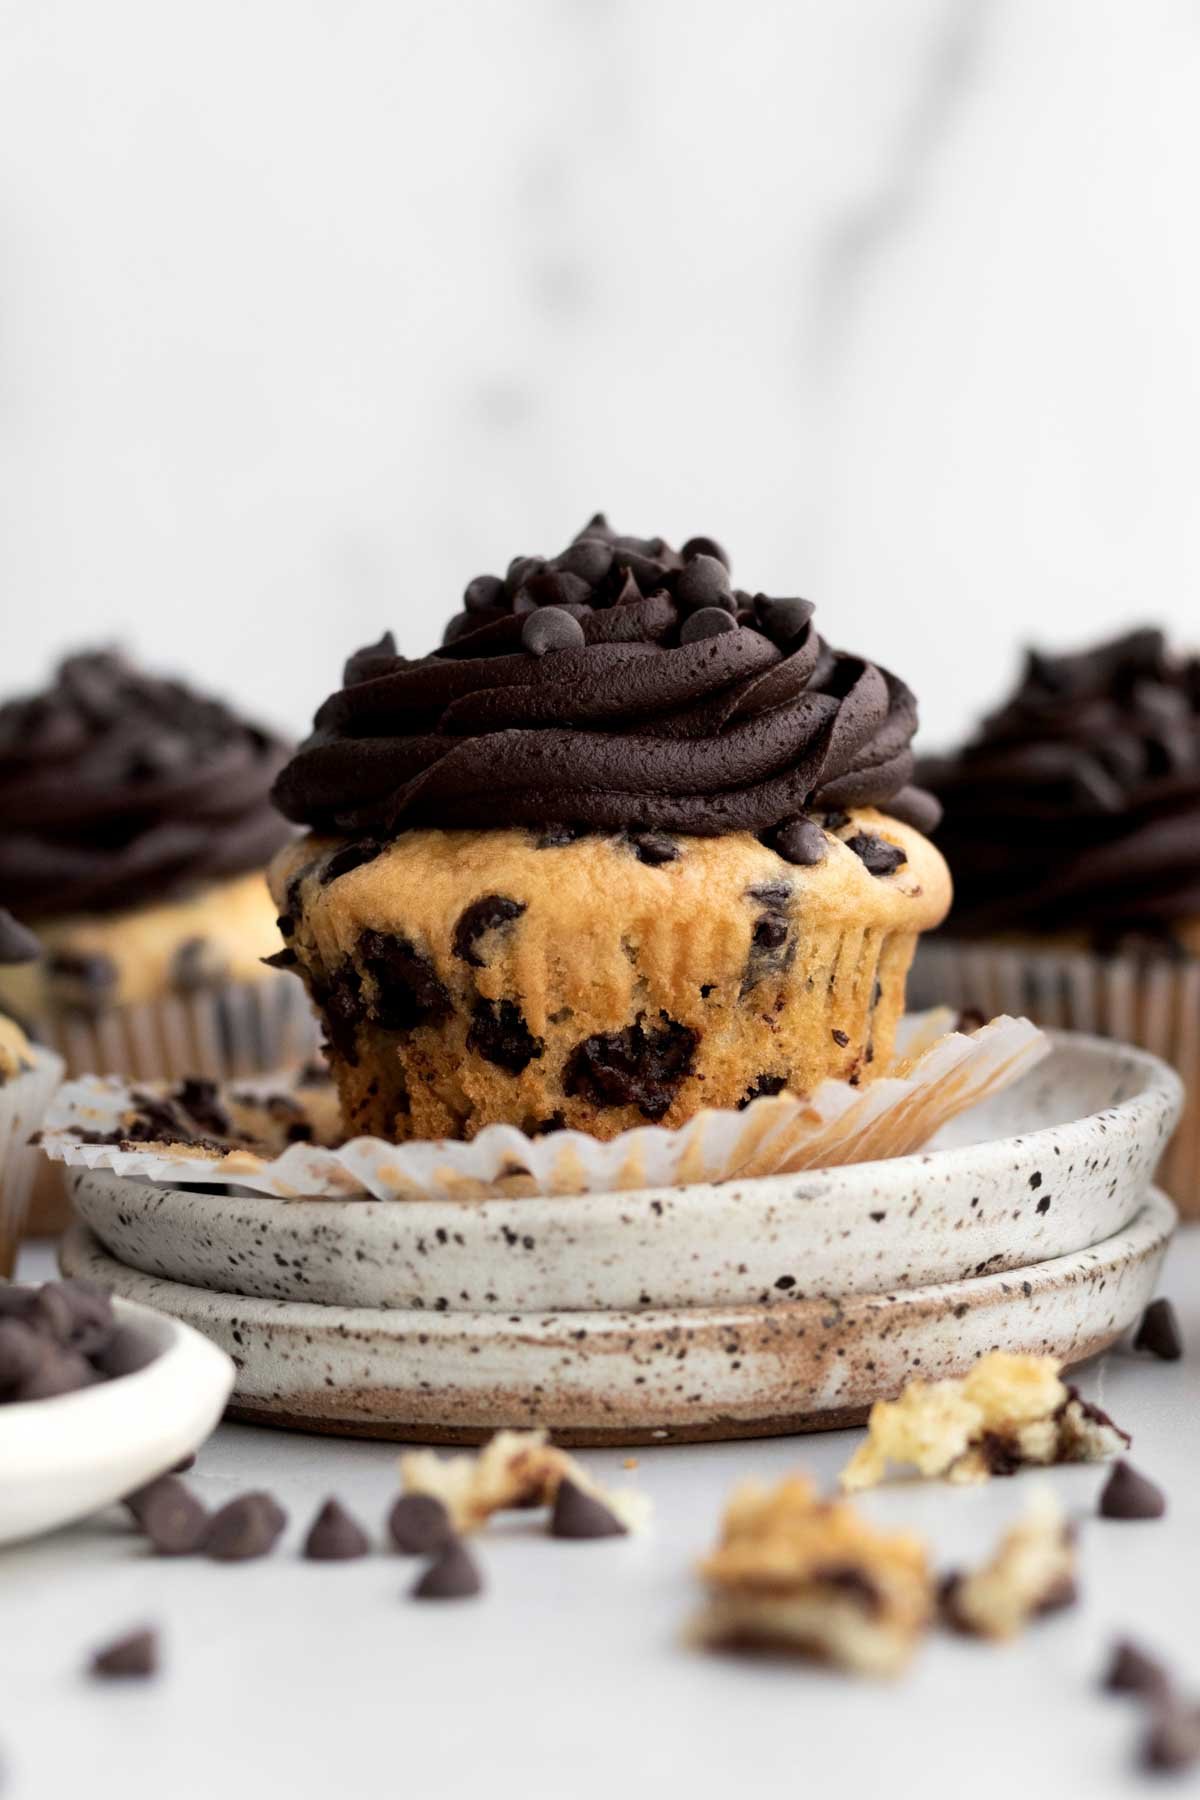 Chocolate chips on the swirl of chocolate frosting add layer of soft crunch to the cupcake.